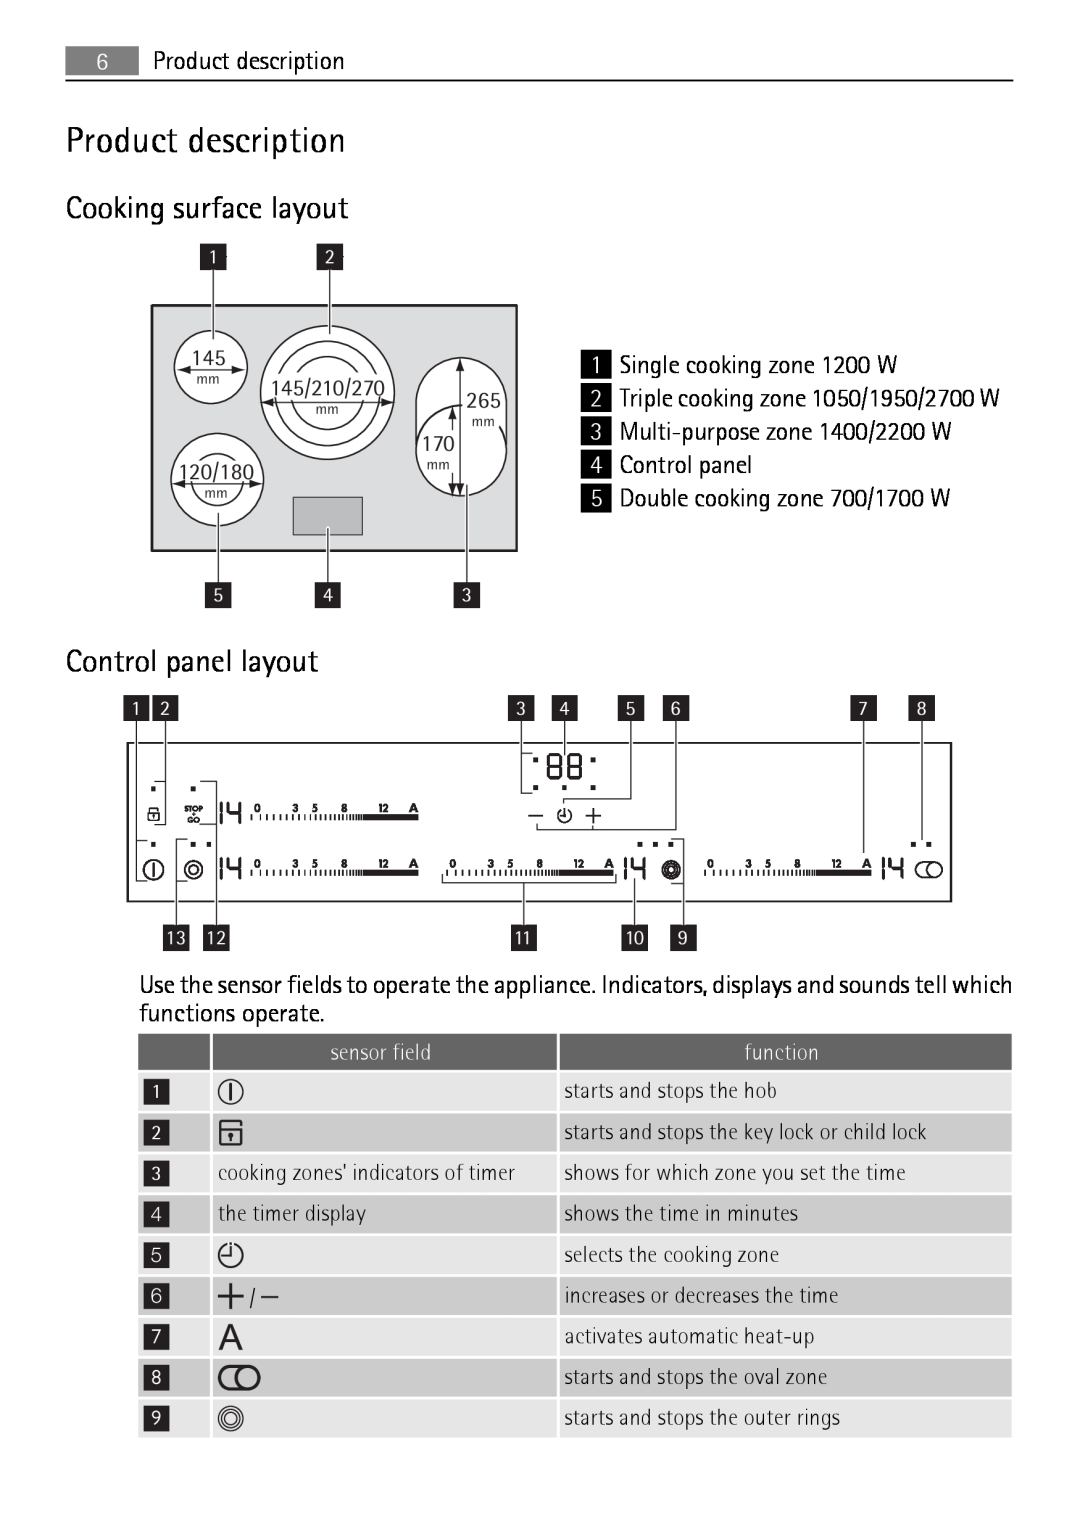 AEG HK854080XB user manual Product description, Cooking surface layout, Control panel layout 